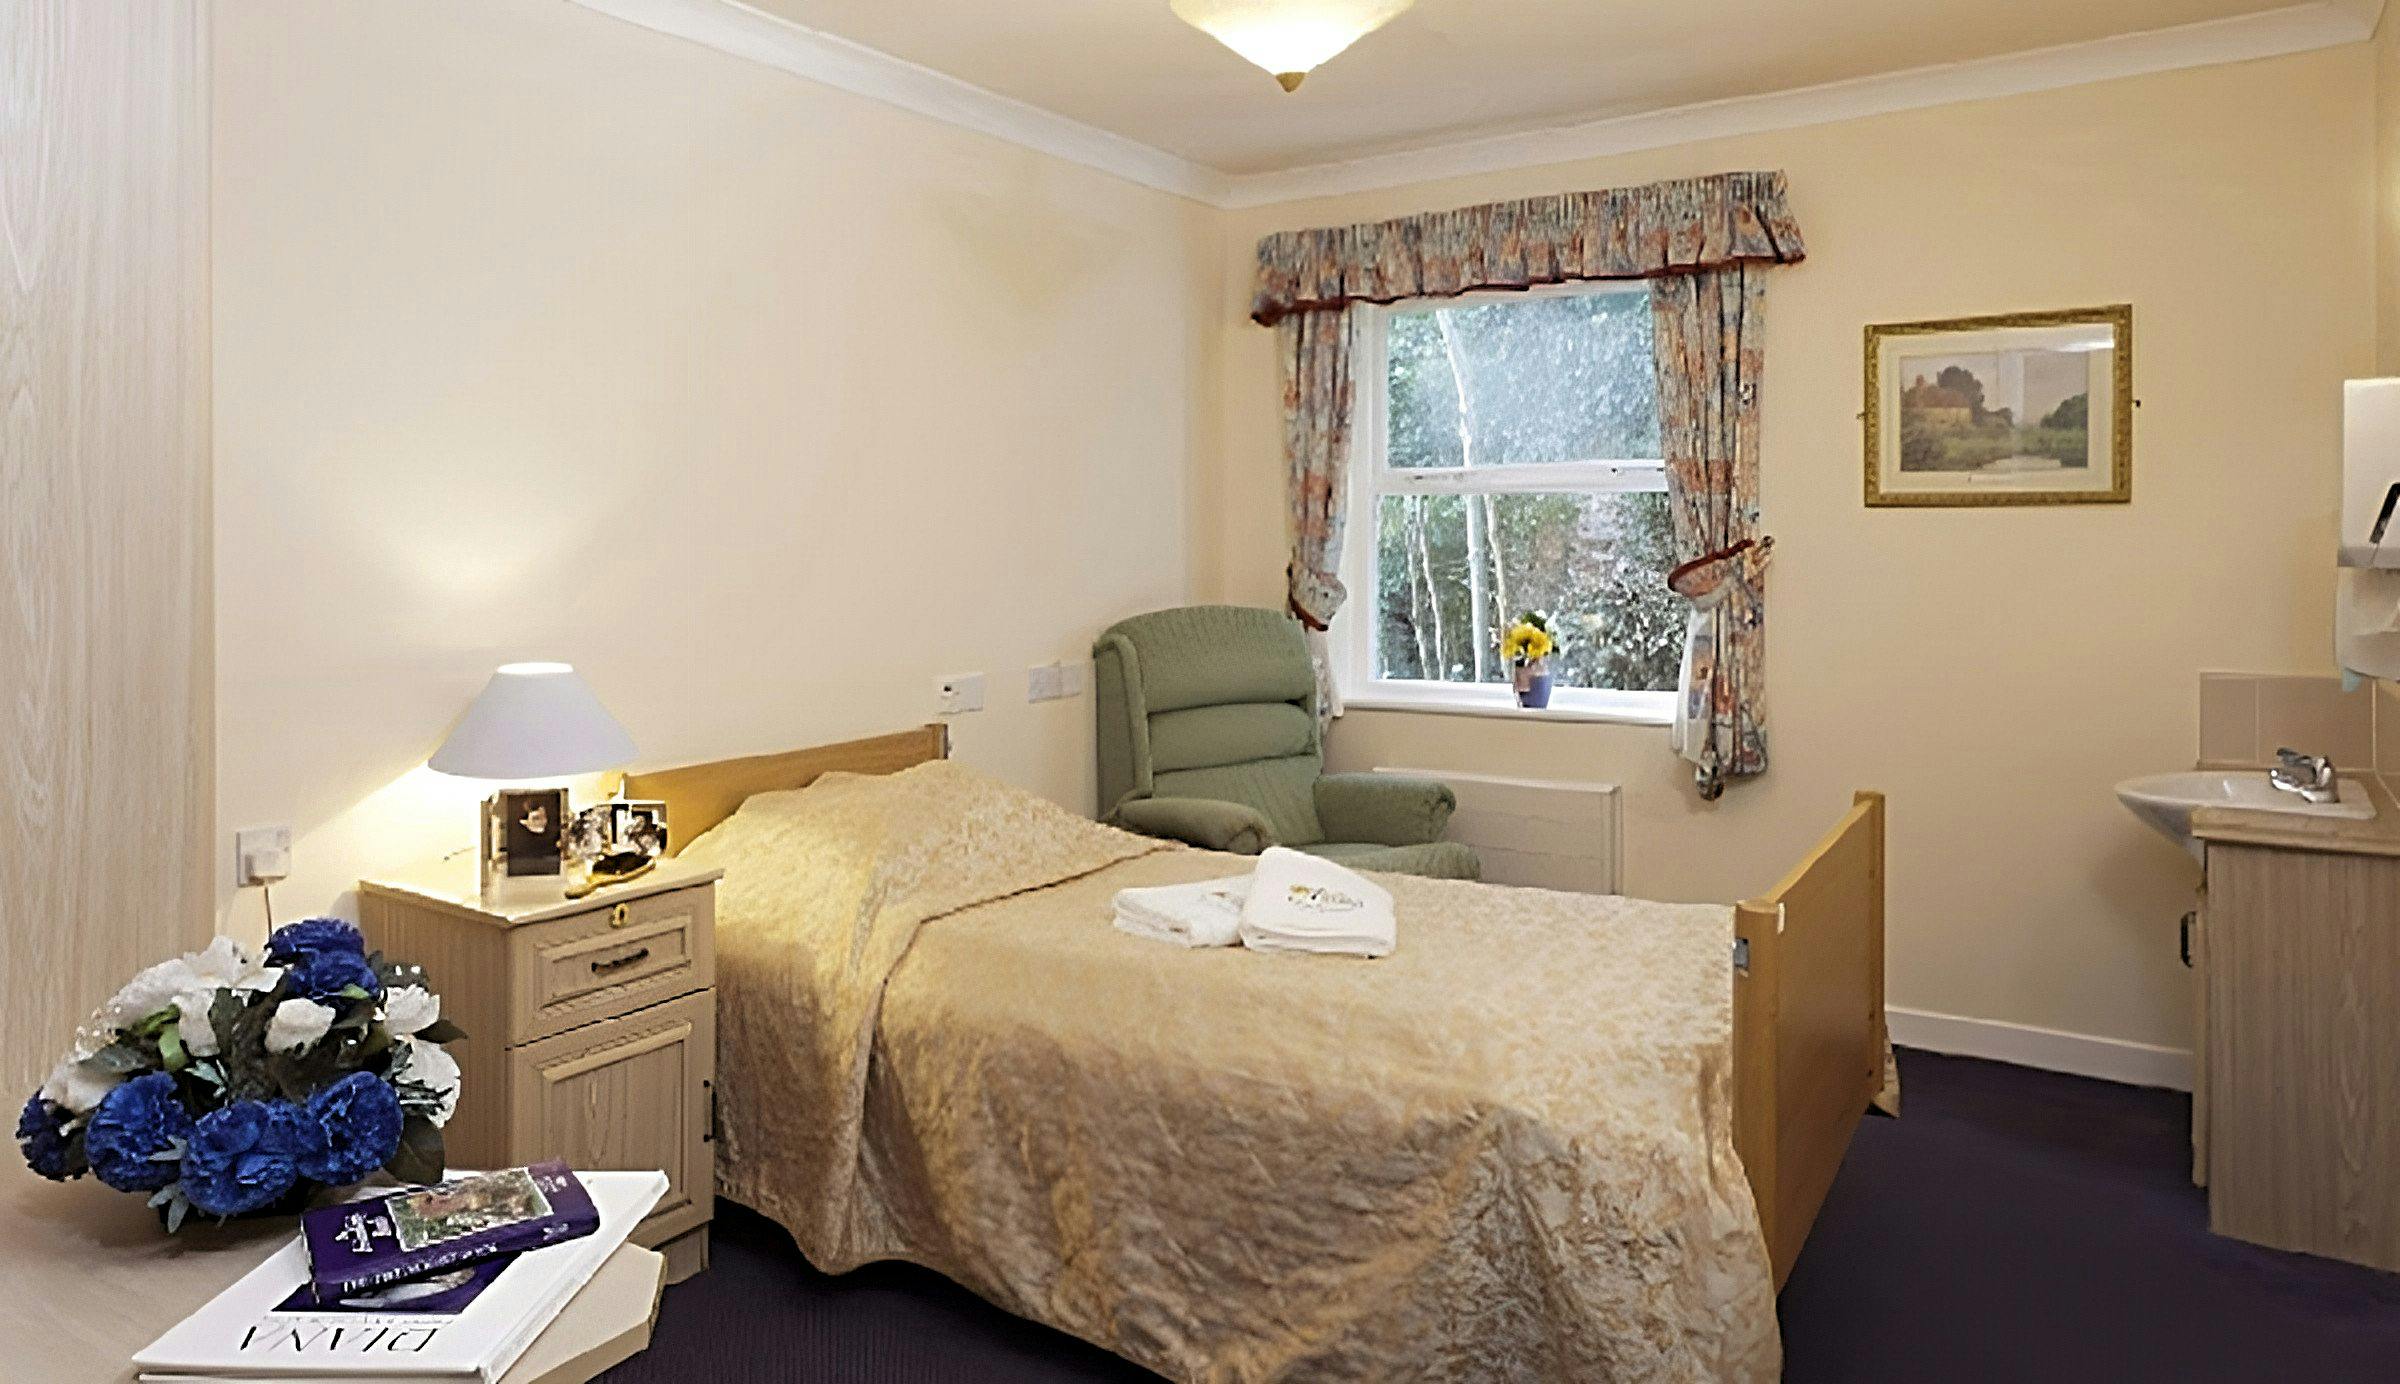 Harbour Healthcare - Belle Vue care home 4